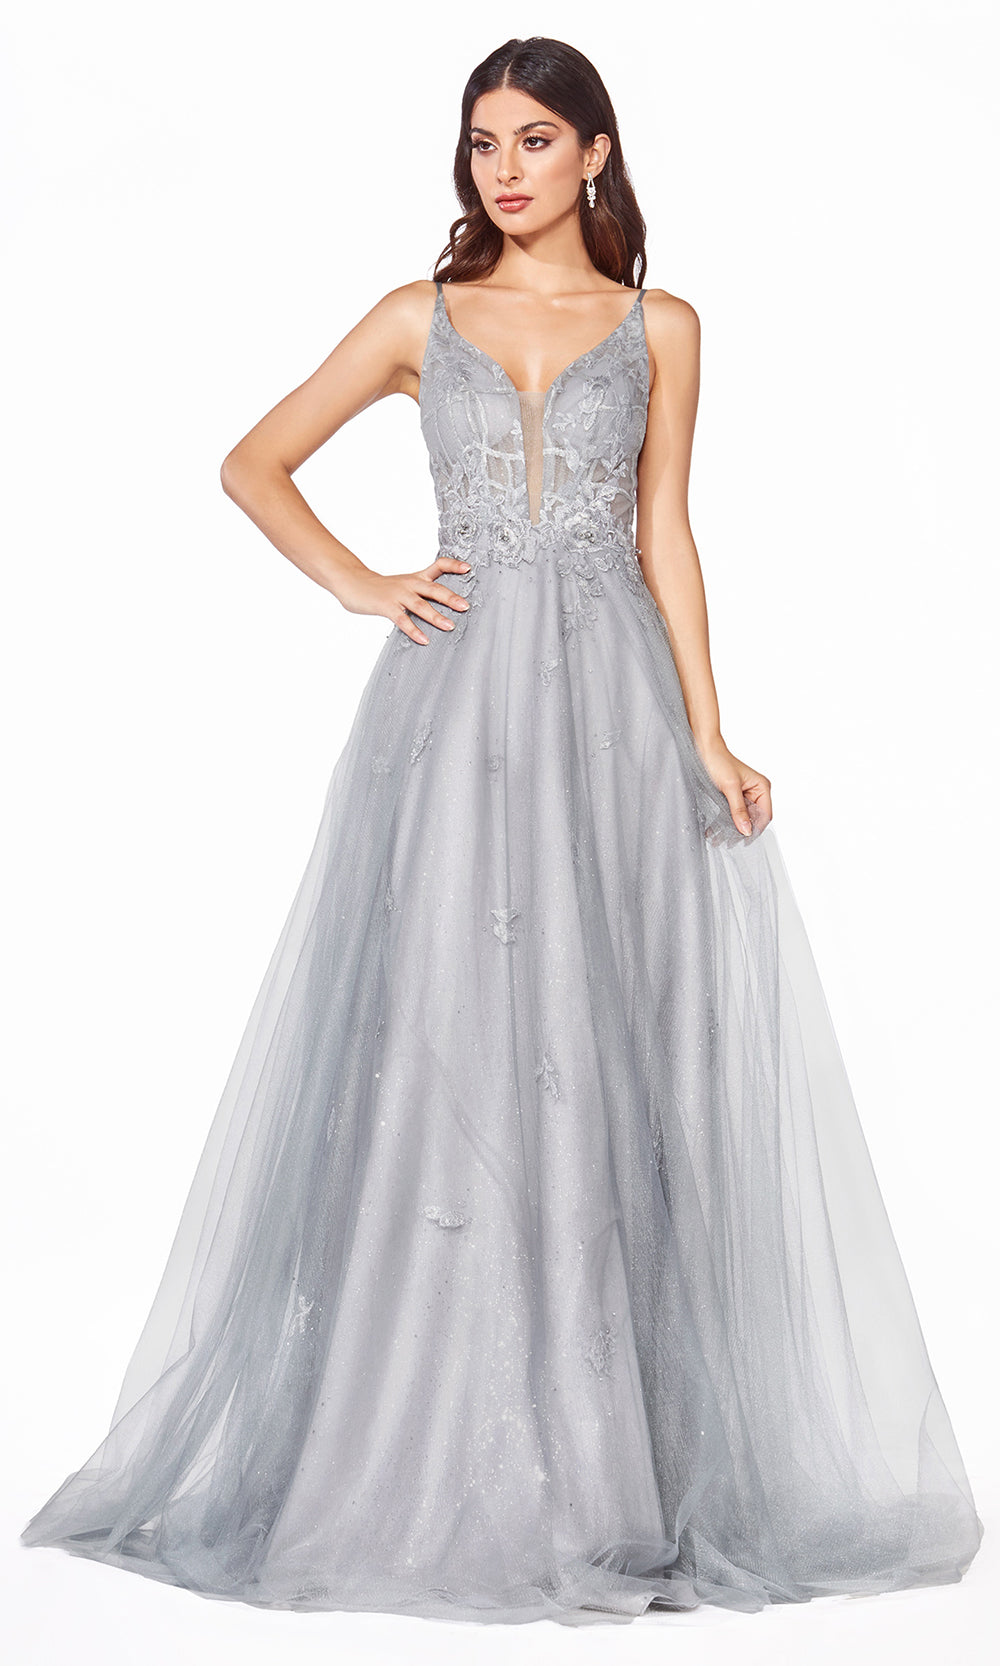 Cinderella CD50 long silver gray tulle v neck flow simple dress w/ wide straps & low back. Perfect light grey evening dress for prom, formal wedding guest dress, indowestern gown, prom, black tie event, gala, debut, sweet 16.Plus sizes available-2.jpg